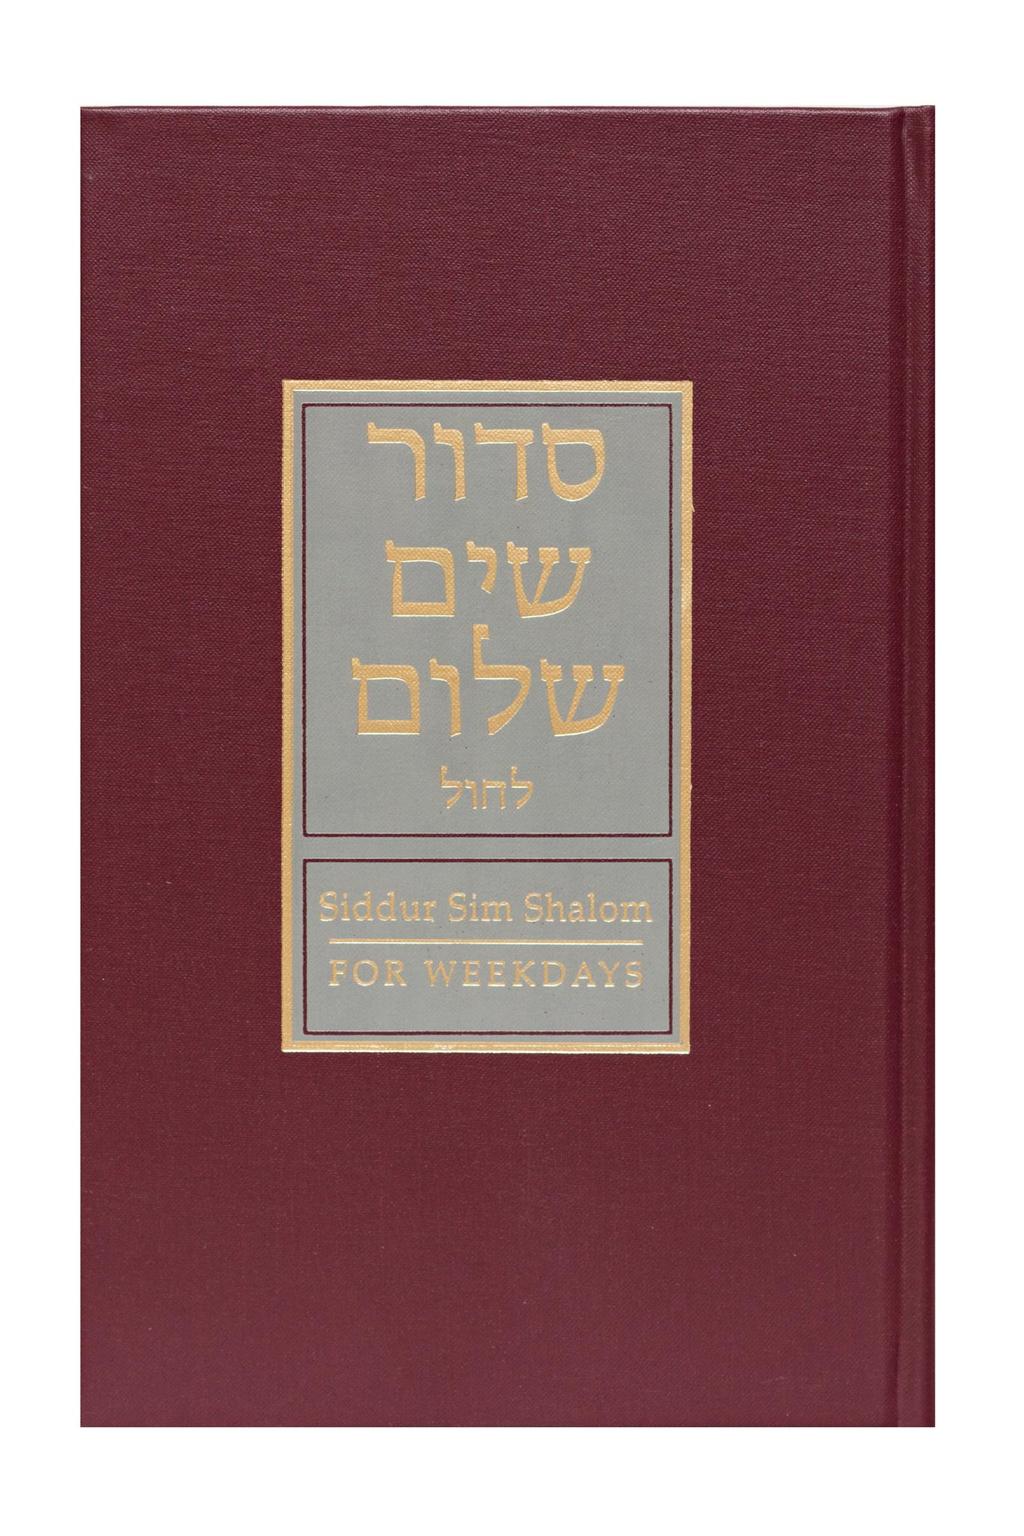 These Are the Deeds I want to share a teaching from our daily minyan, one of the cornerstones of our community, a place where our community is strengthened every day.